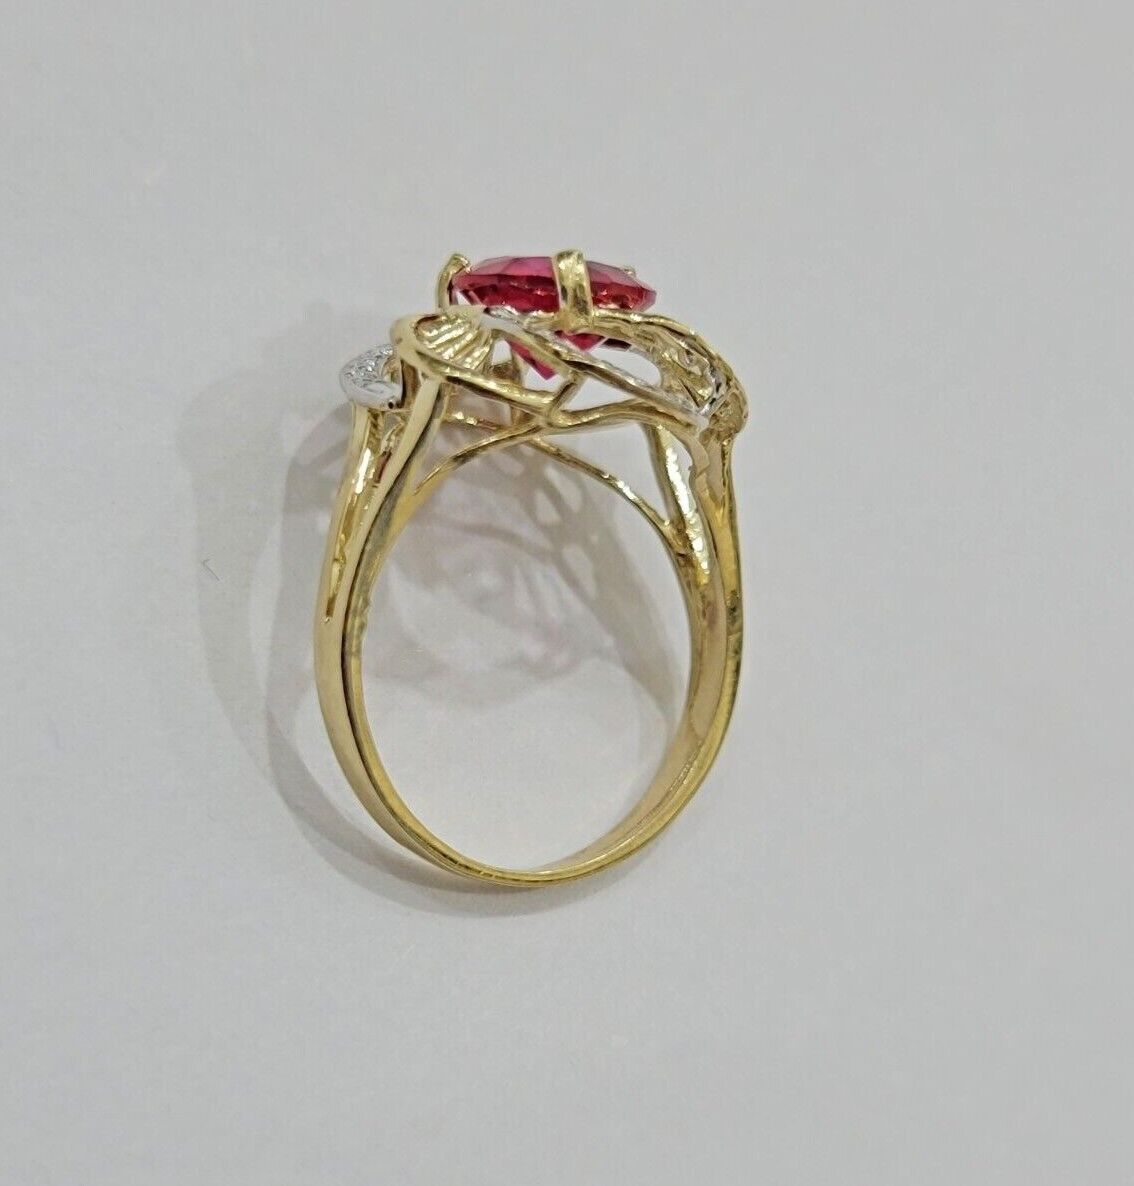 10k Yellow Gold Ladies Ruby Red Ring Womens Casual Band SALE Real 10kt Brand New